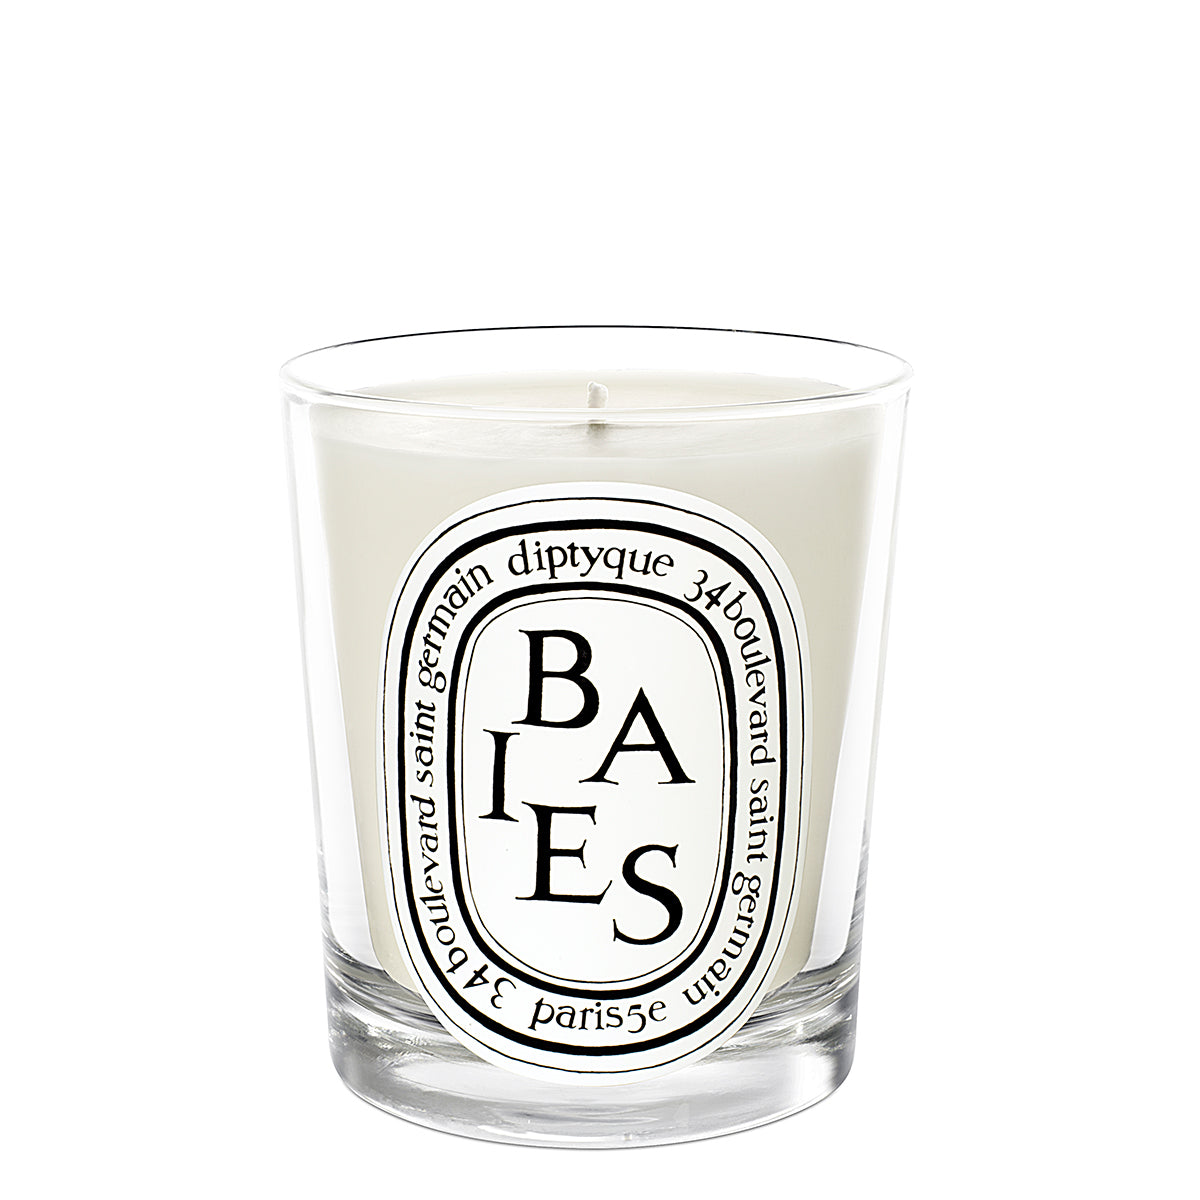 Primary image of Baies (Berries) Mini Candle